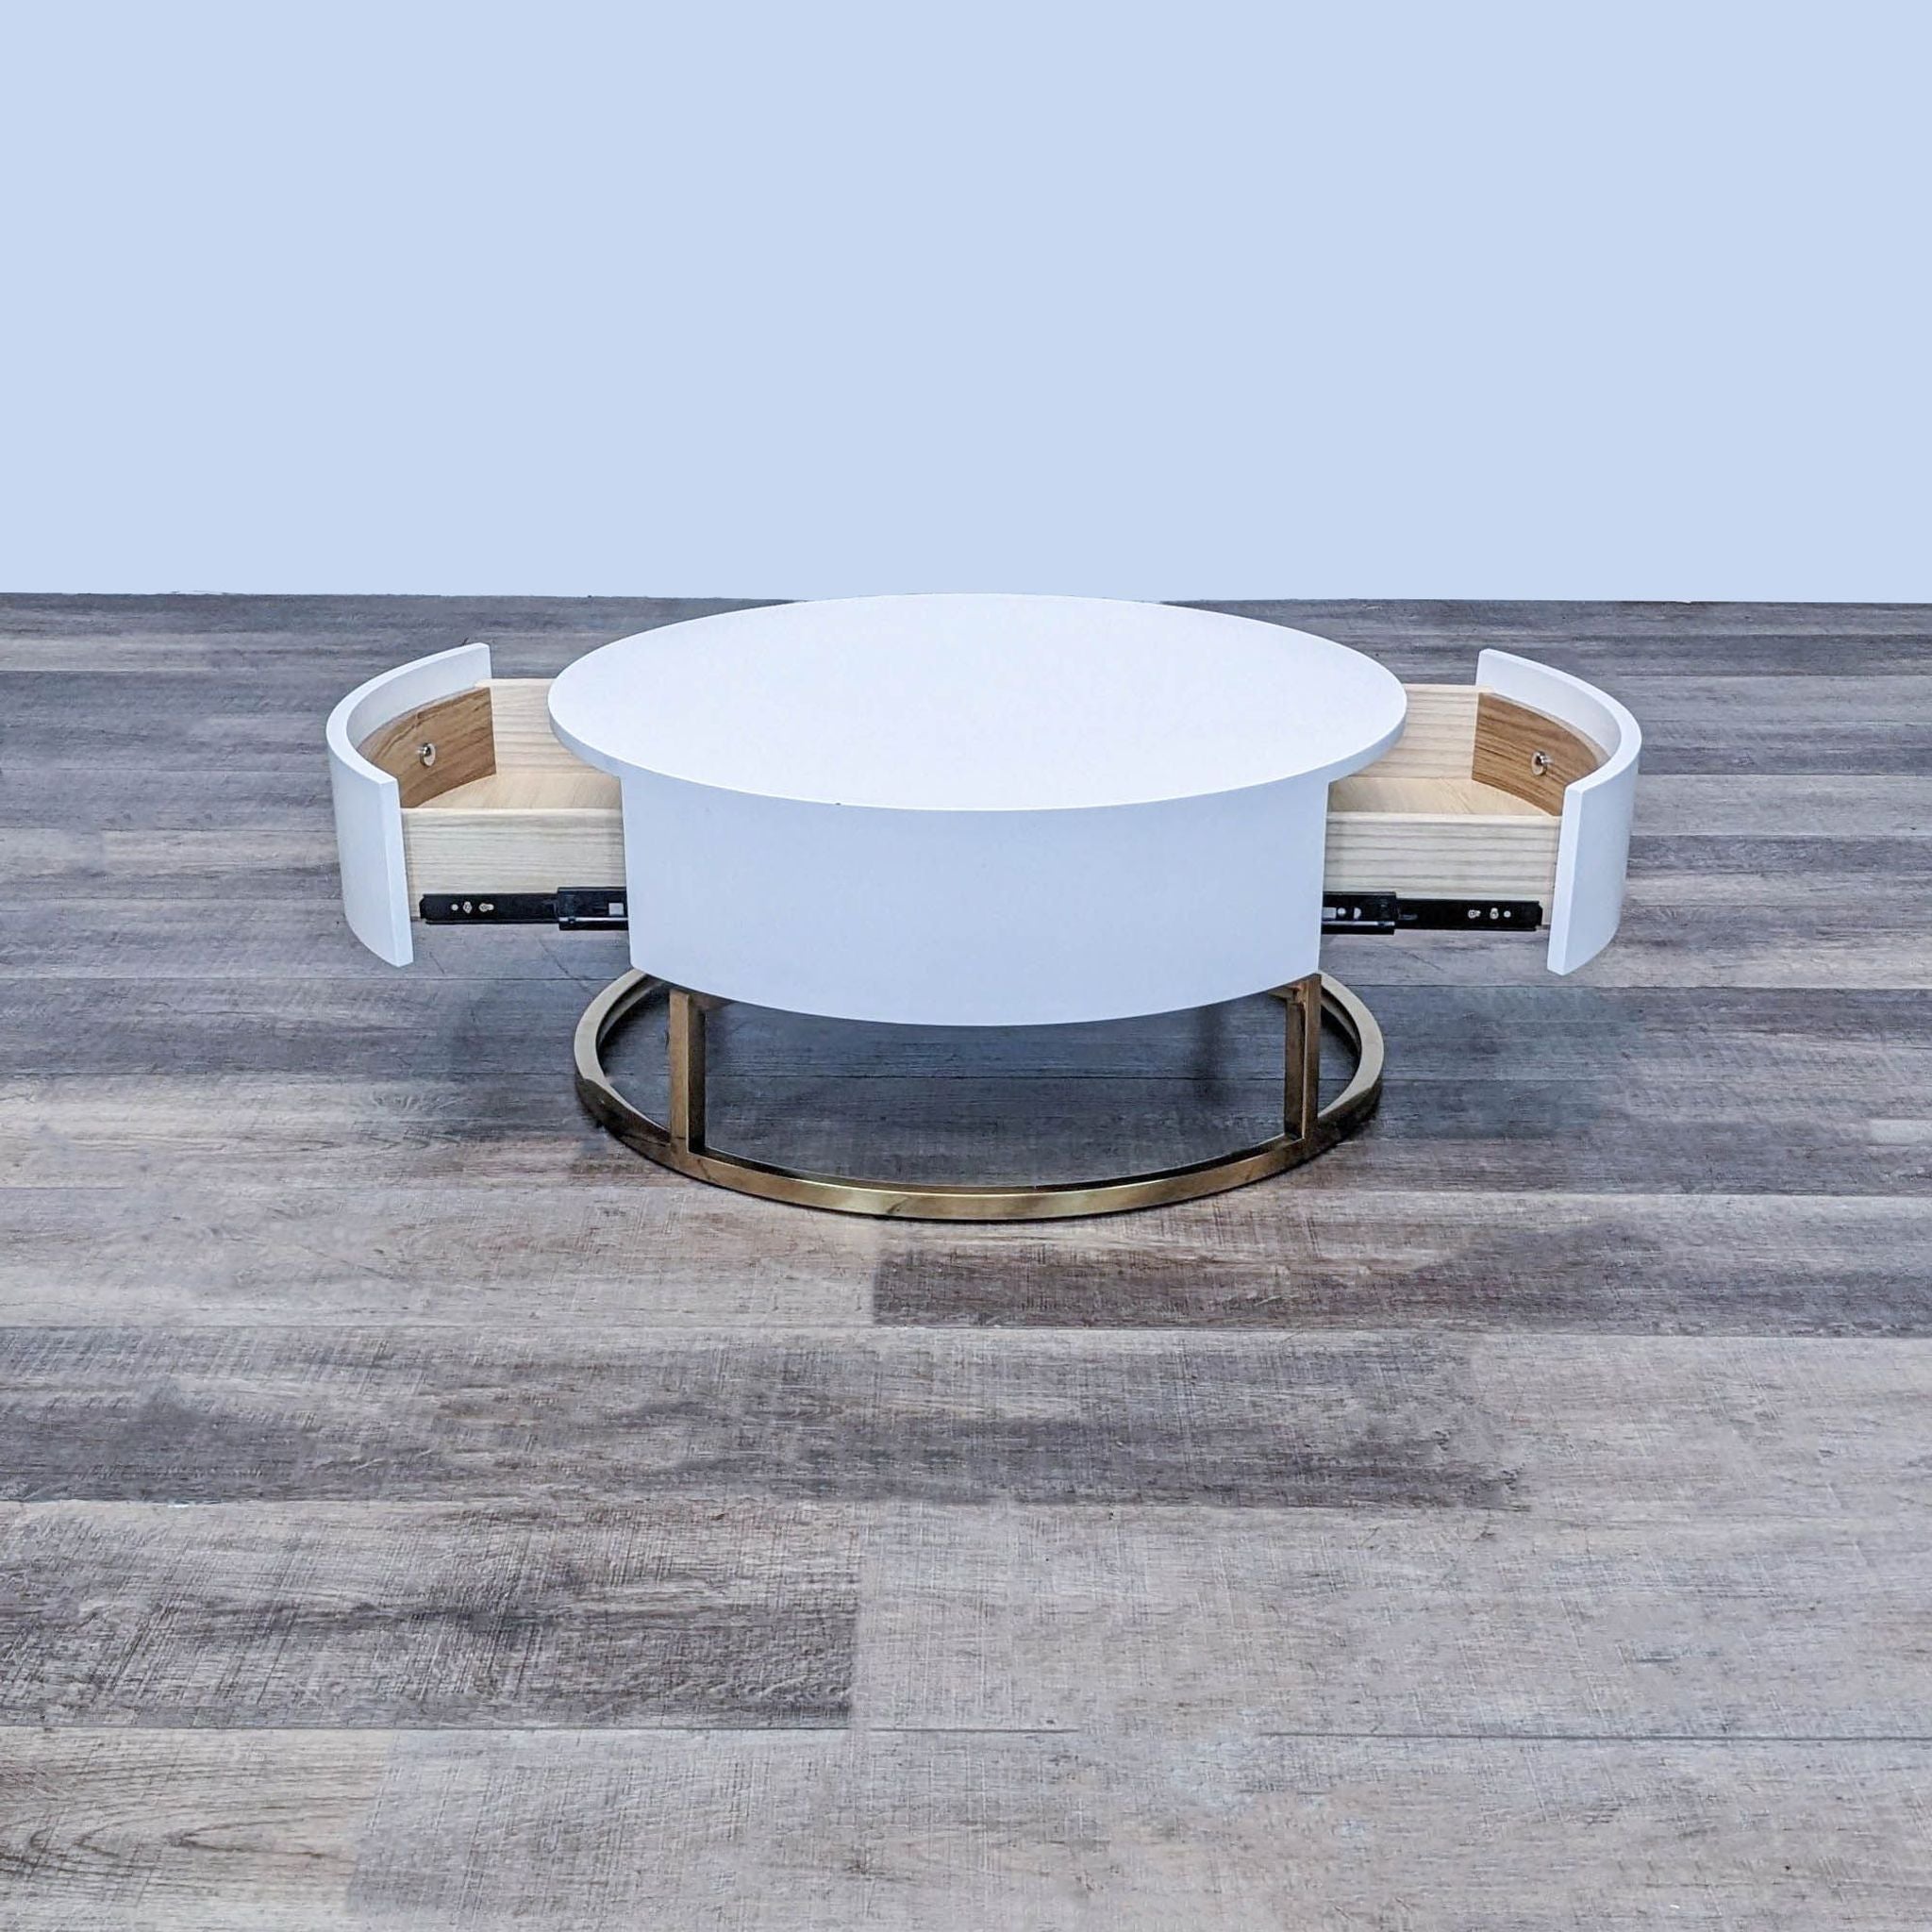 Alt text 2: Reperch coffee table with open drawers revealing storage, circular white top, on a wooden floor.